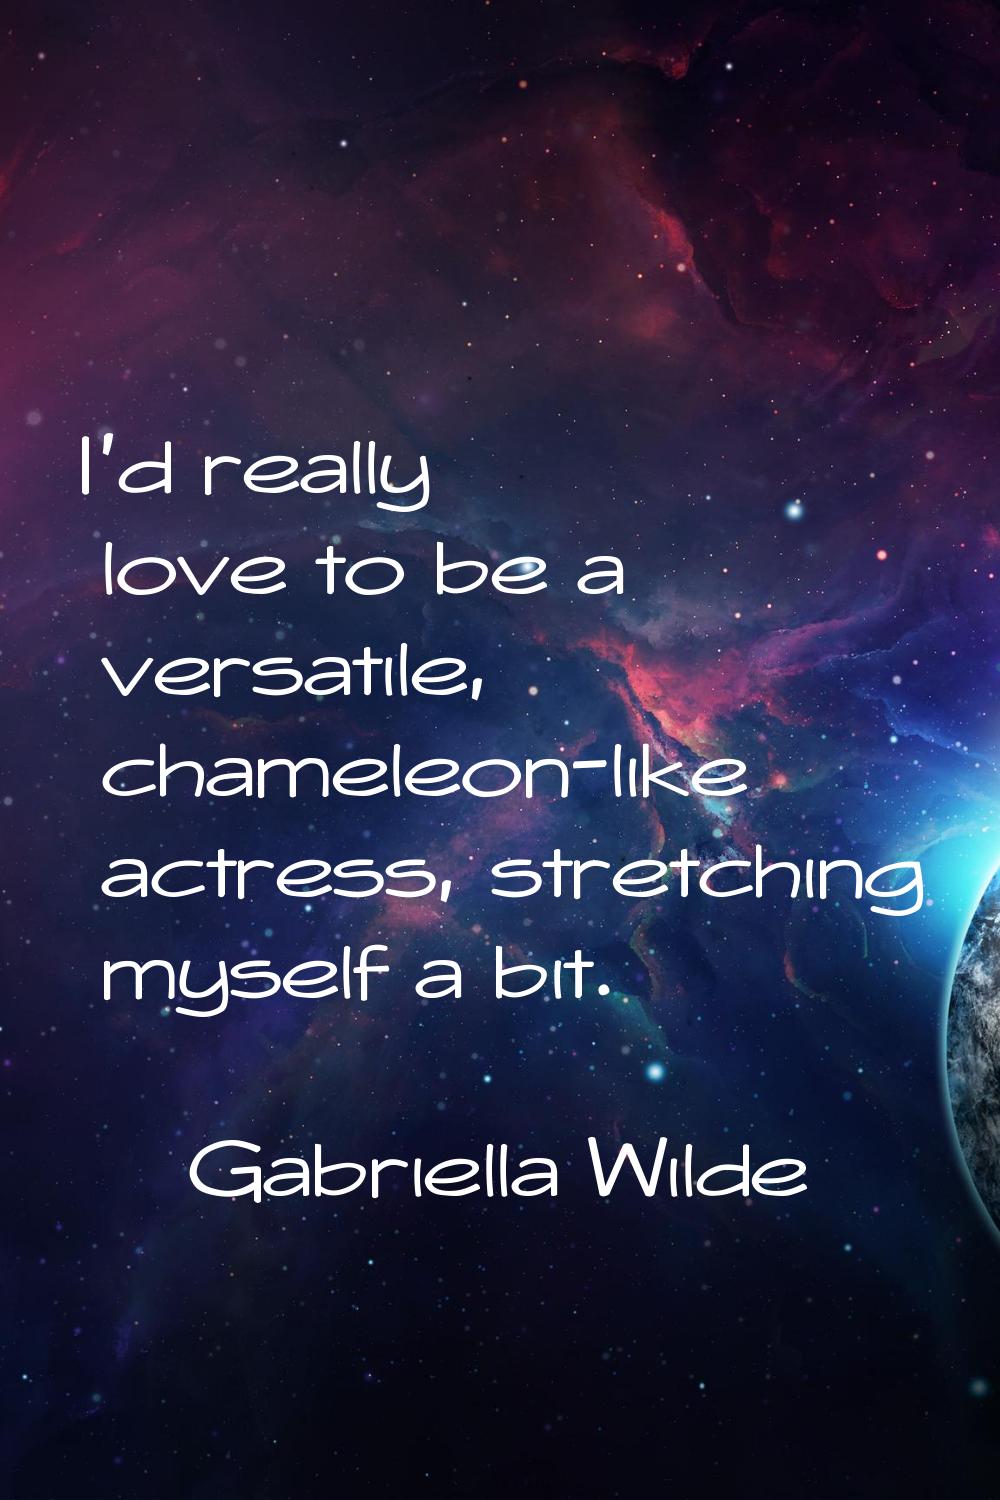 I'd really love to be a versatile, chameleon-like actress, stretching myself a bit.